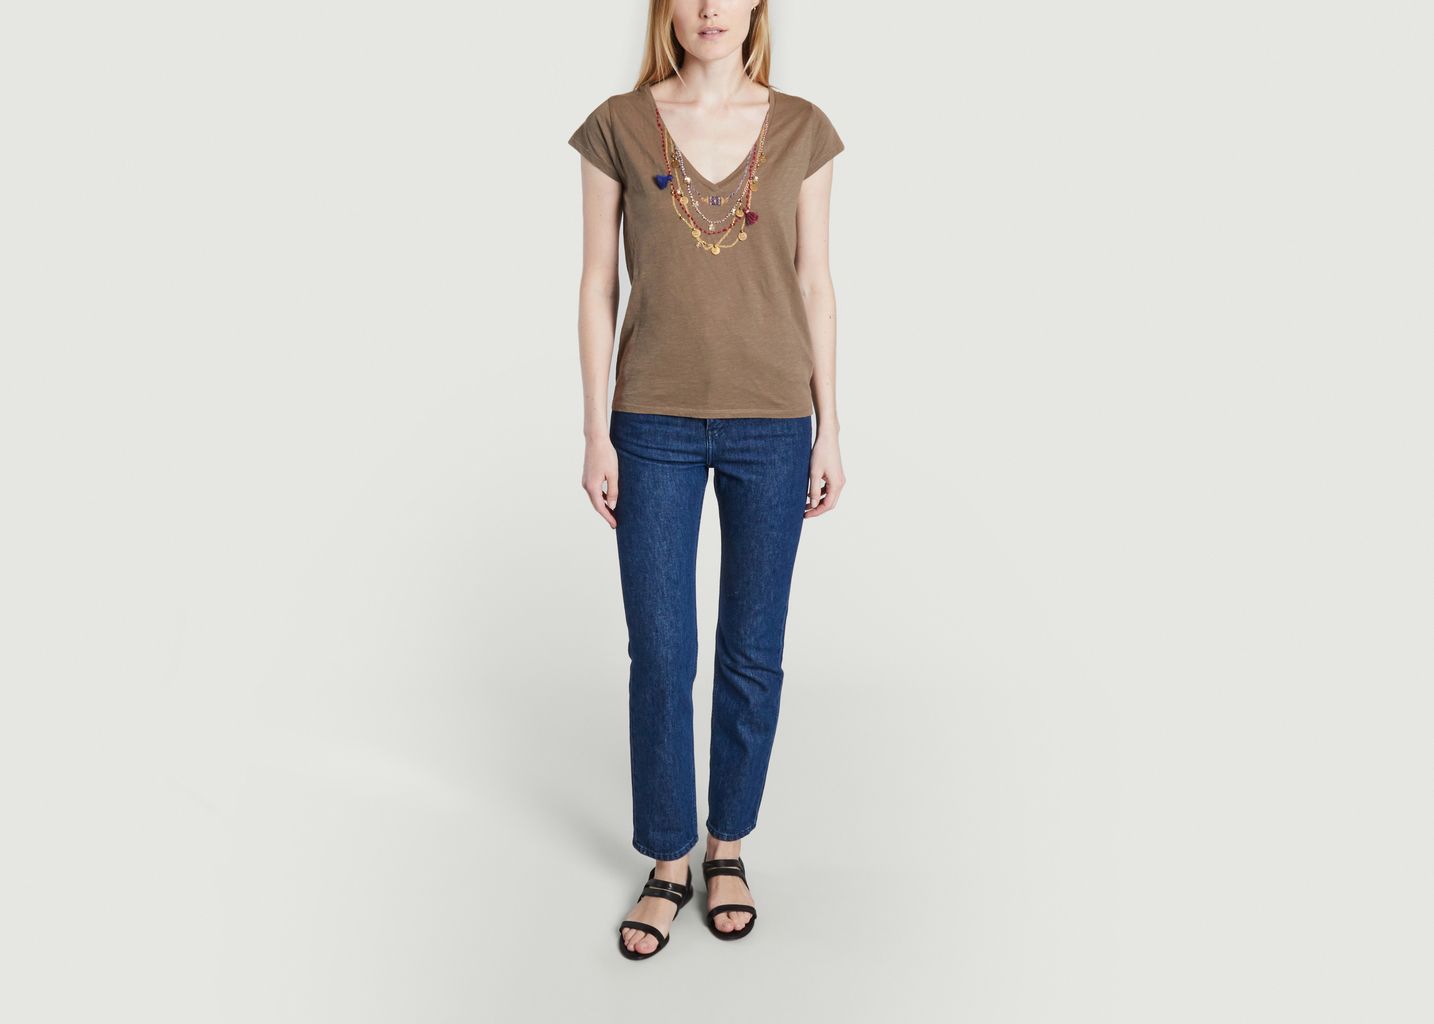 Organic cotton t-shirt with necklace pattern Tonton Medail - Leon & Harper